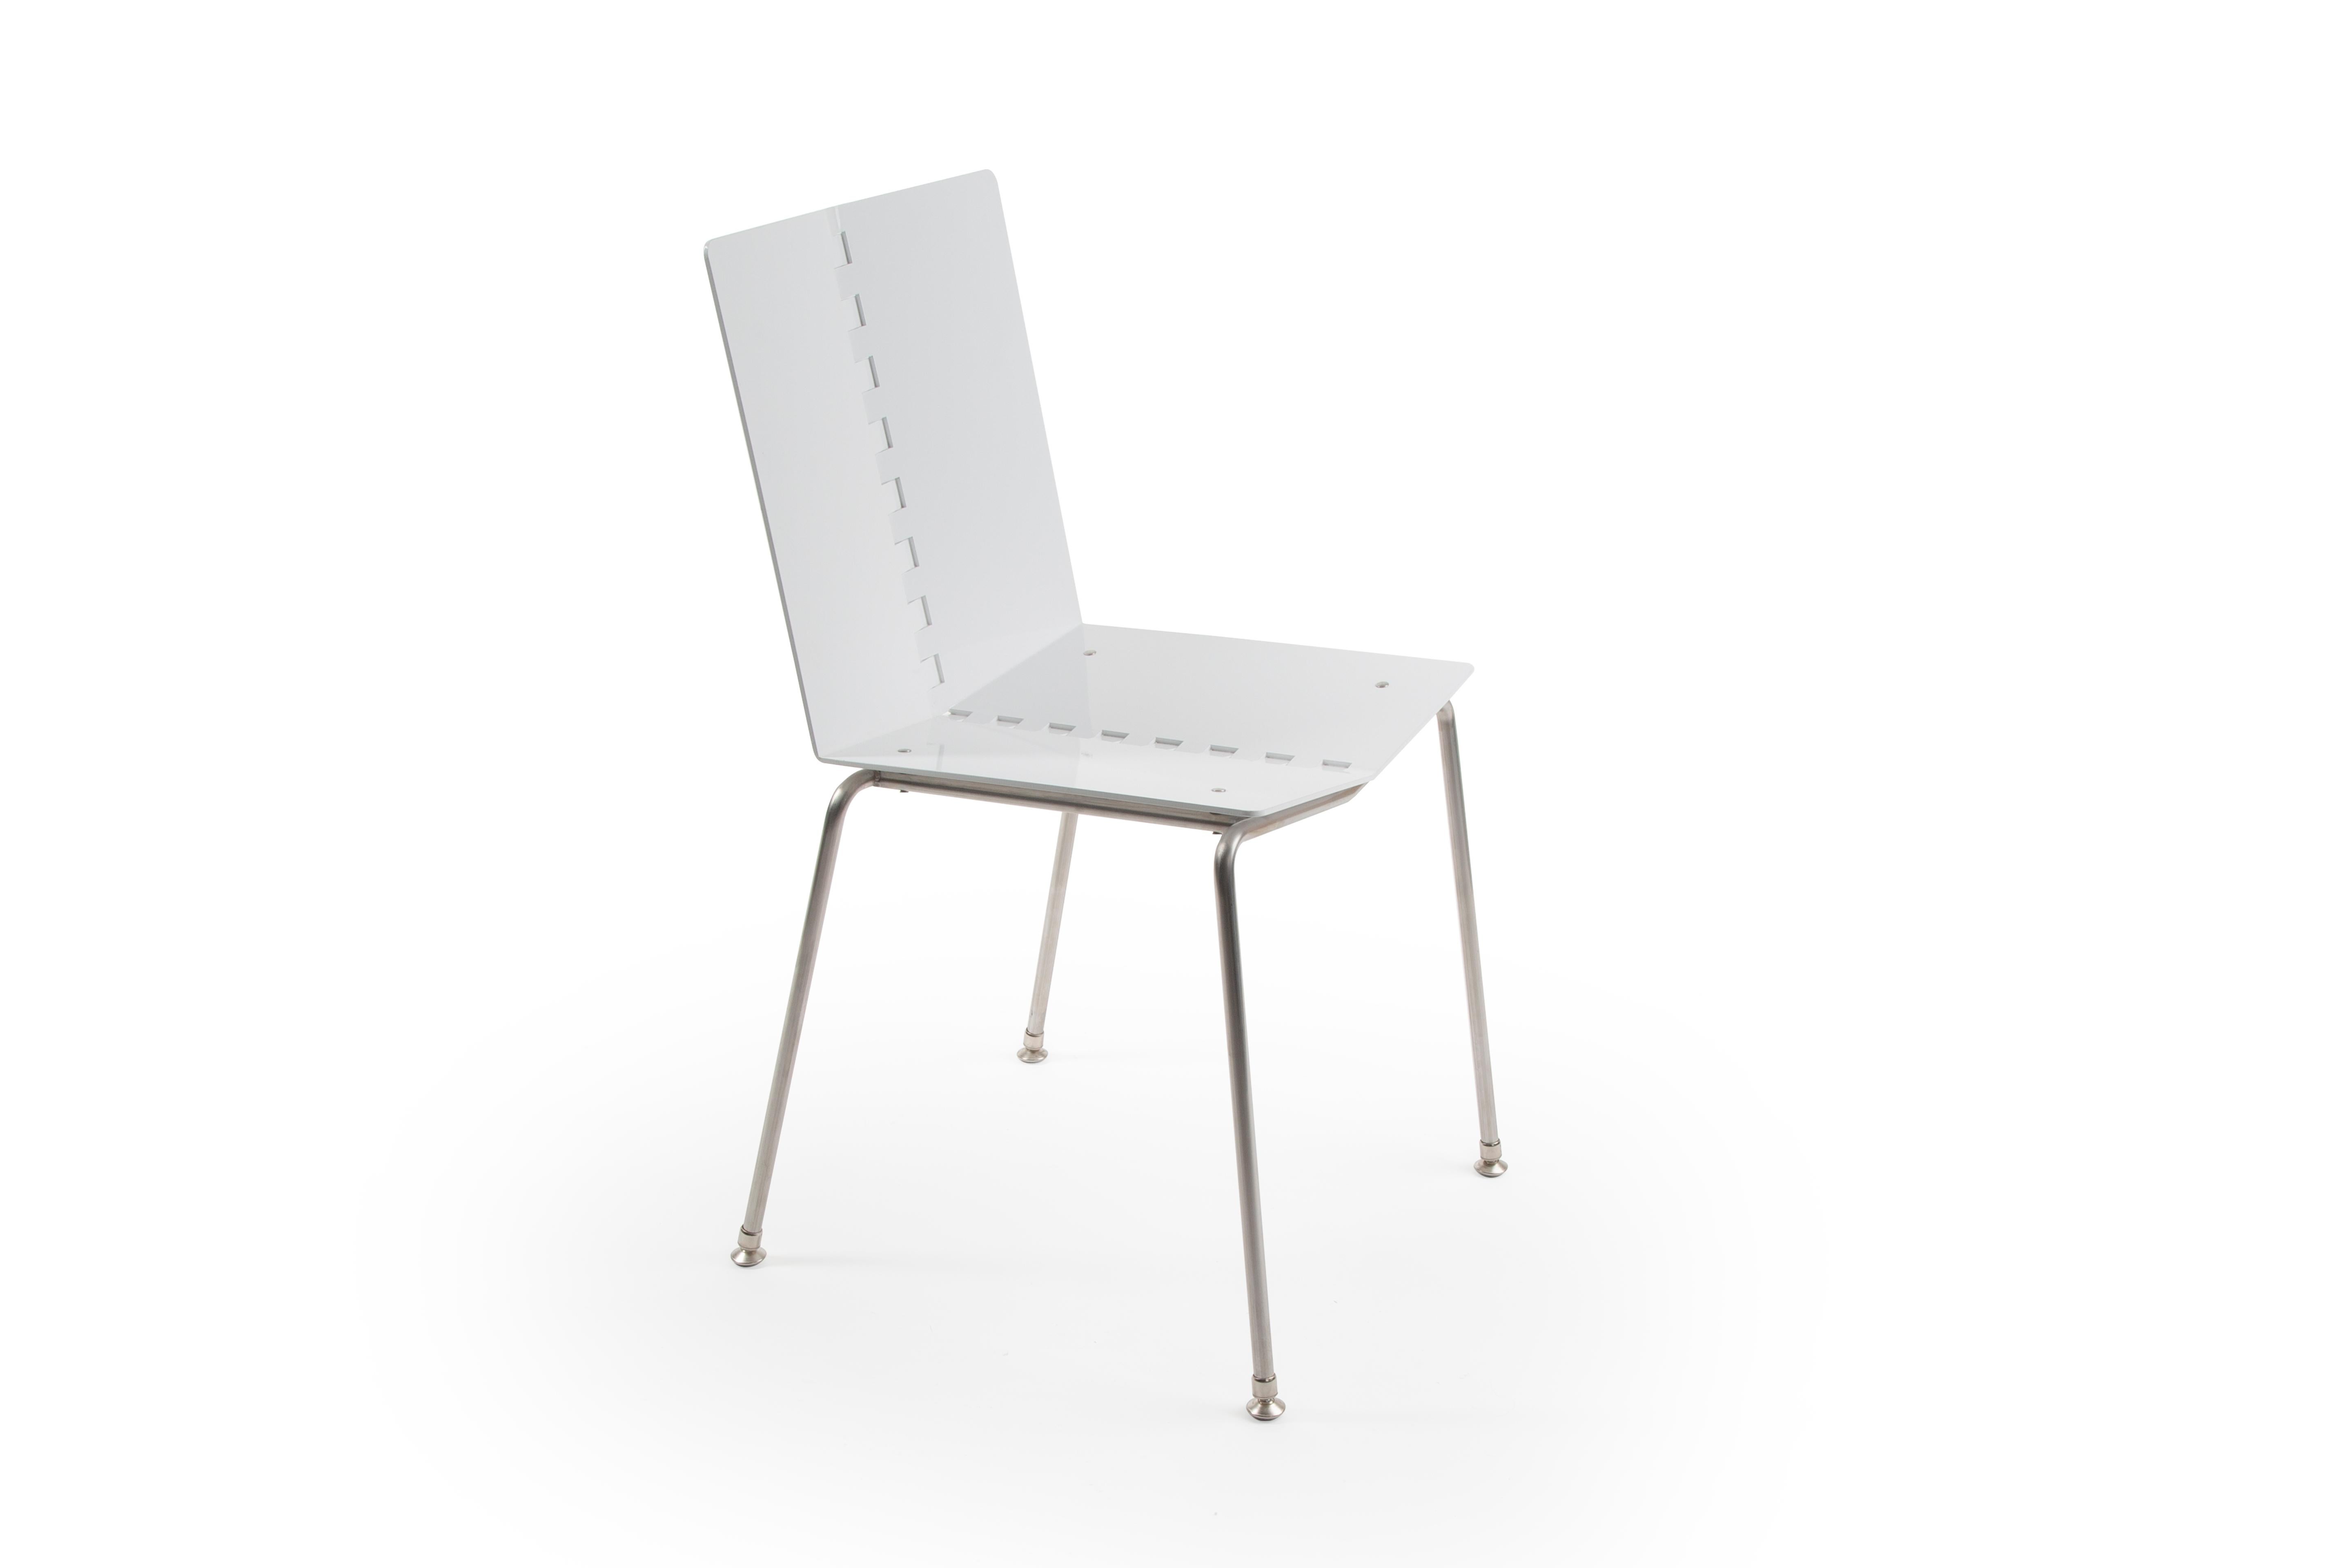 This unique dining chair is perfect for any small cafe, coffee shop, dining room or restaurant looking for a contemporary solution for seating. Powder-coated aluminum seat and stainless steel legs make for a simple, sleek aesthetic capable of making